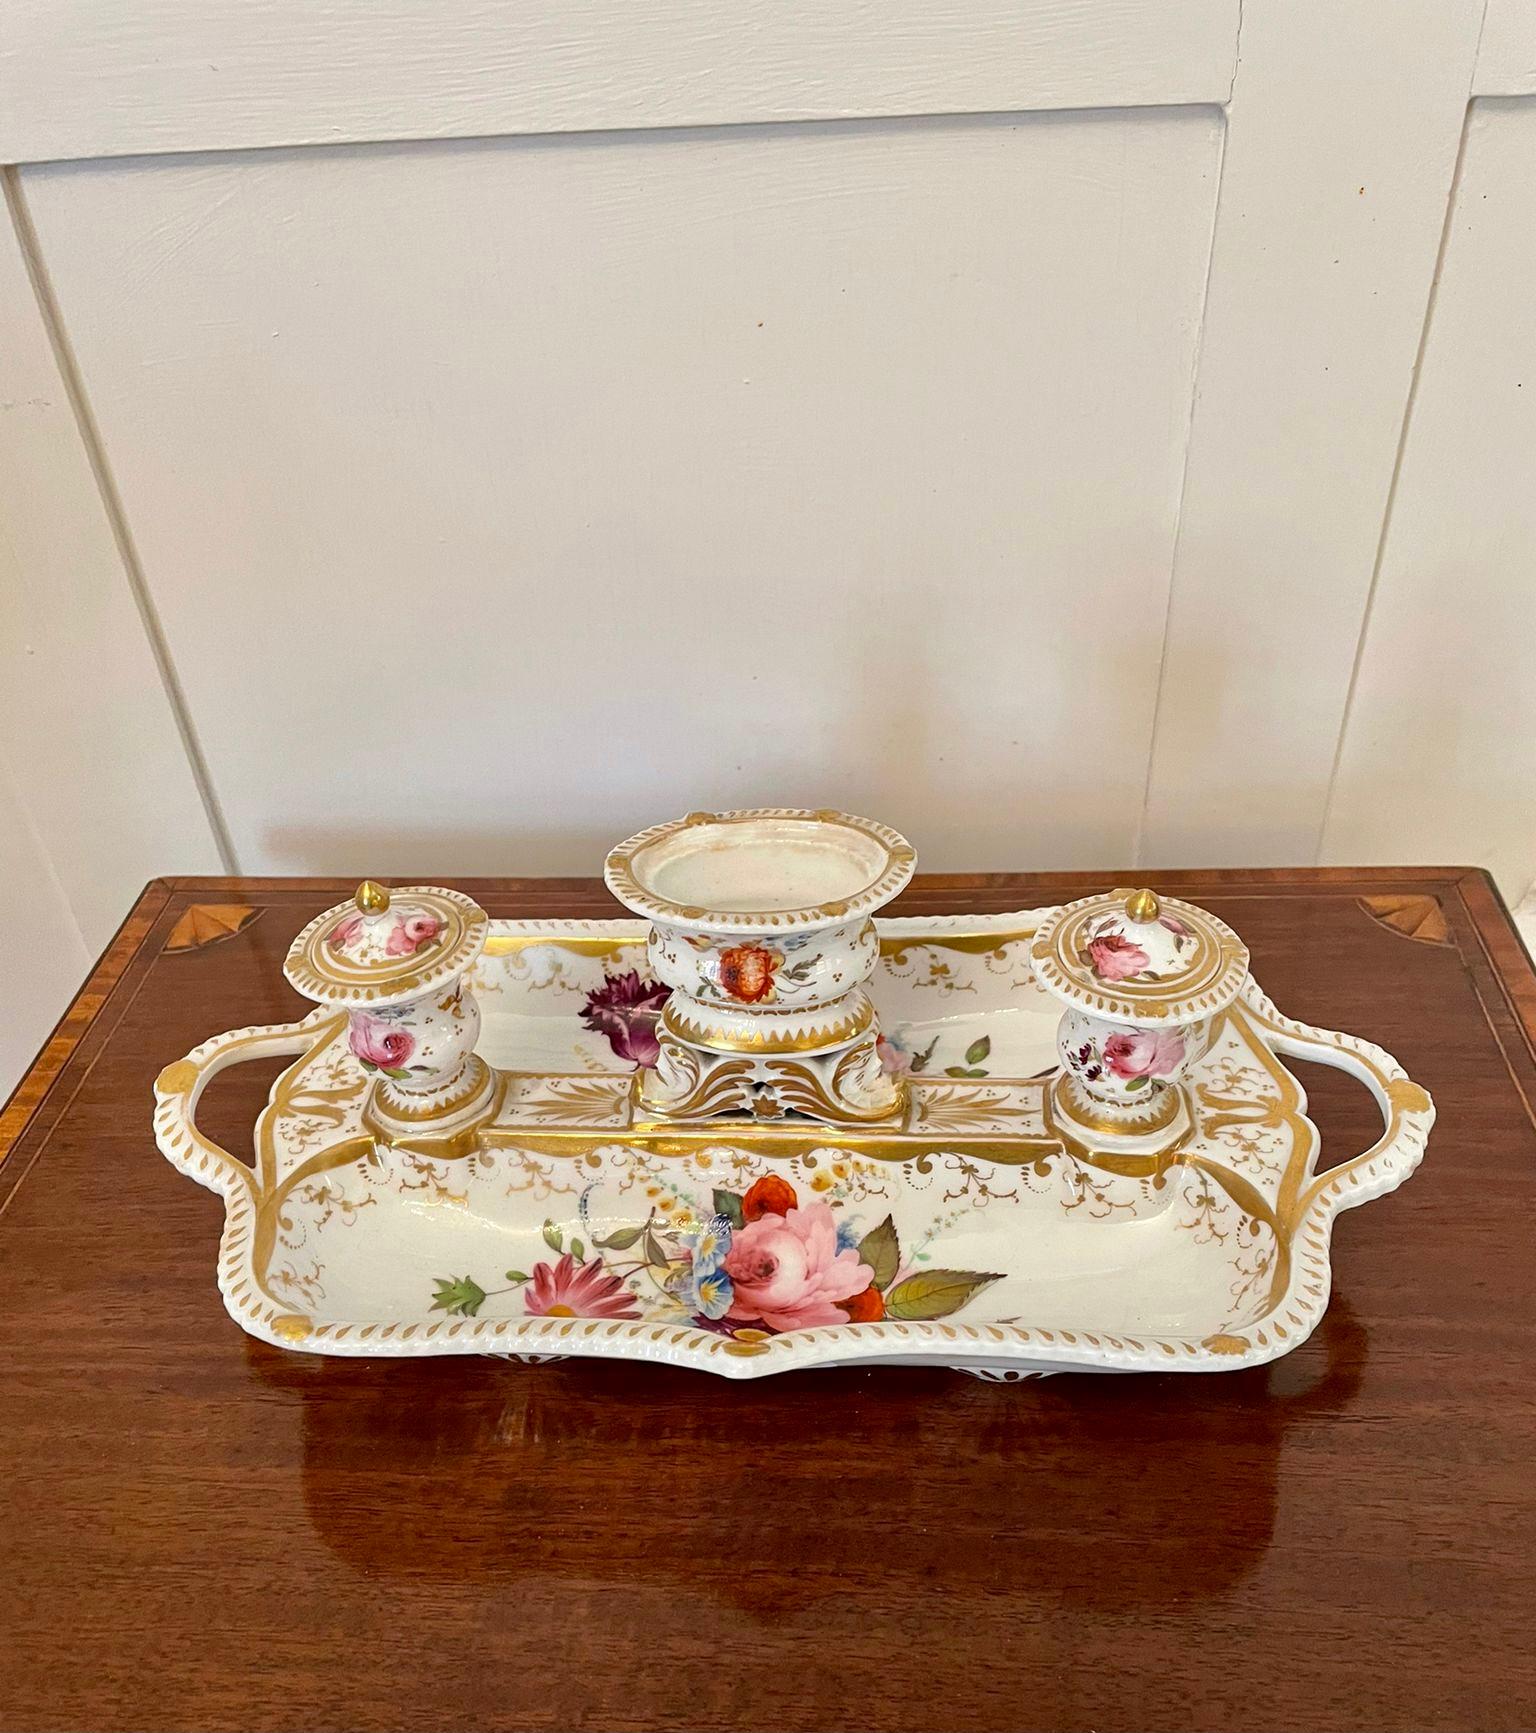 Antique Victorian quality porcelain hand painted desk set having a central raised urn flanked by lidded urns and beautifully decorated with quality hand painted roses and flowers with gilded swag surrounds.

A charming piece in delightful original